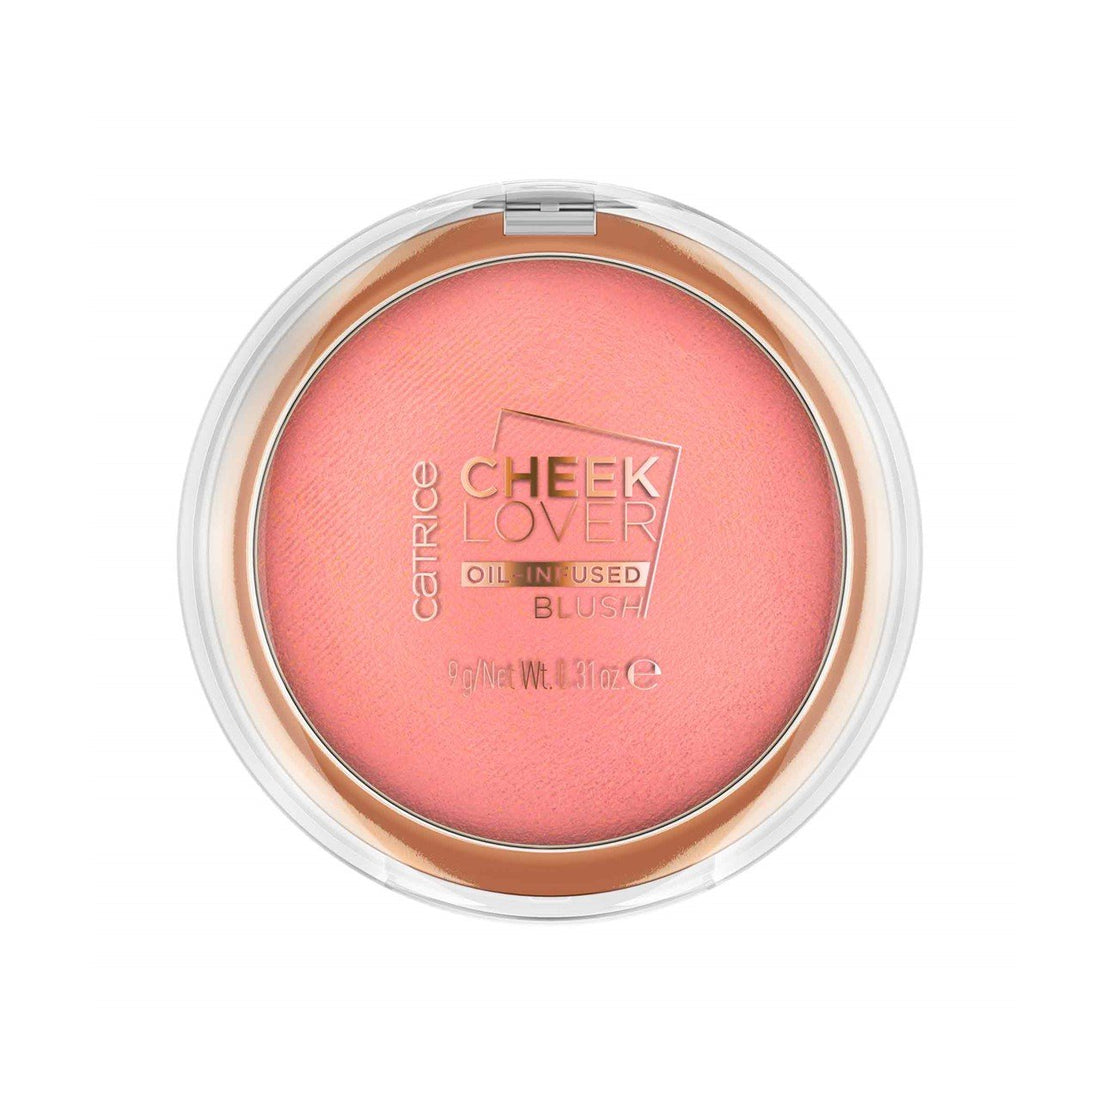 Catrice Cheek Lover Oil-Infused Blush 010 Blooming Hibiscus 9g (0.32oz)